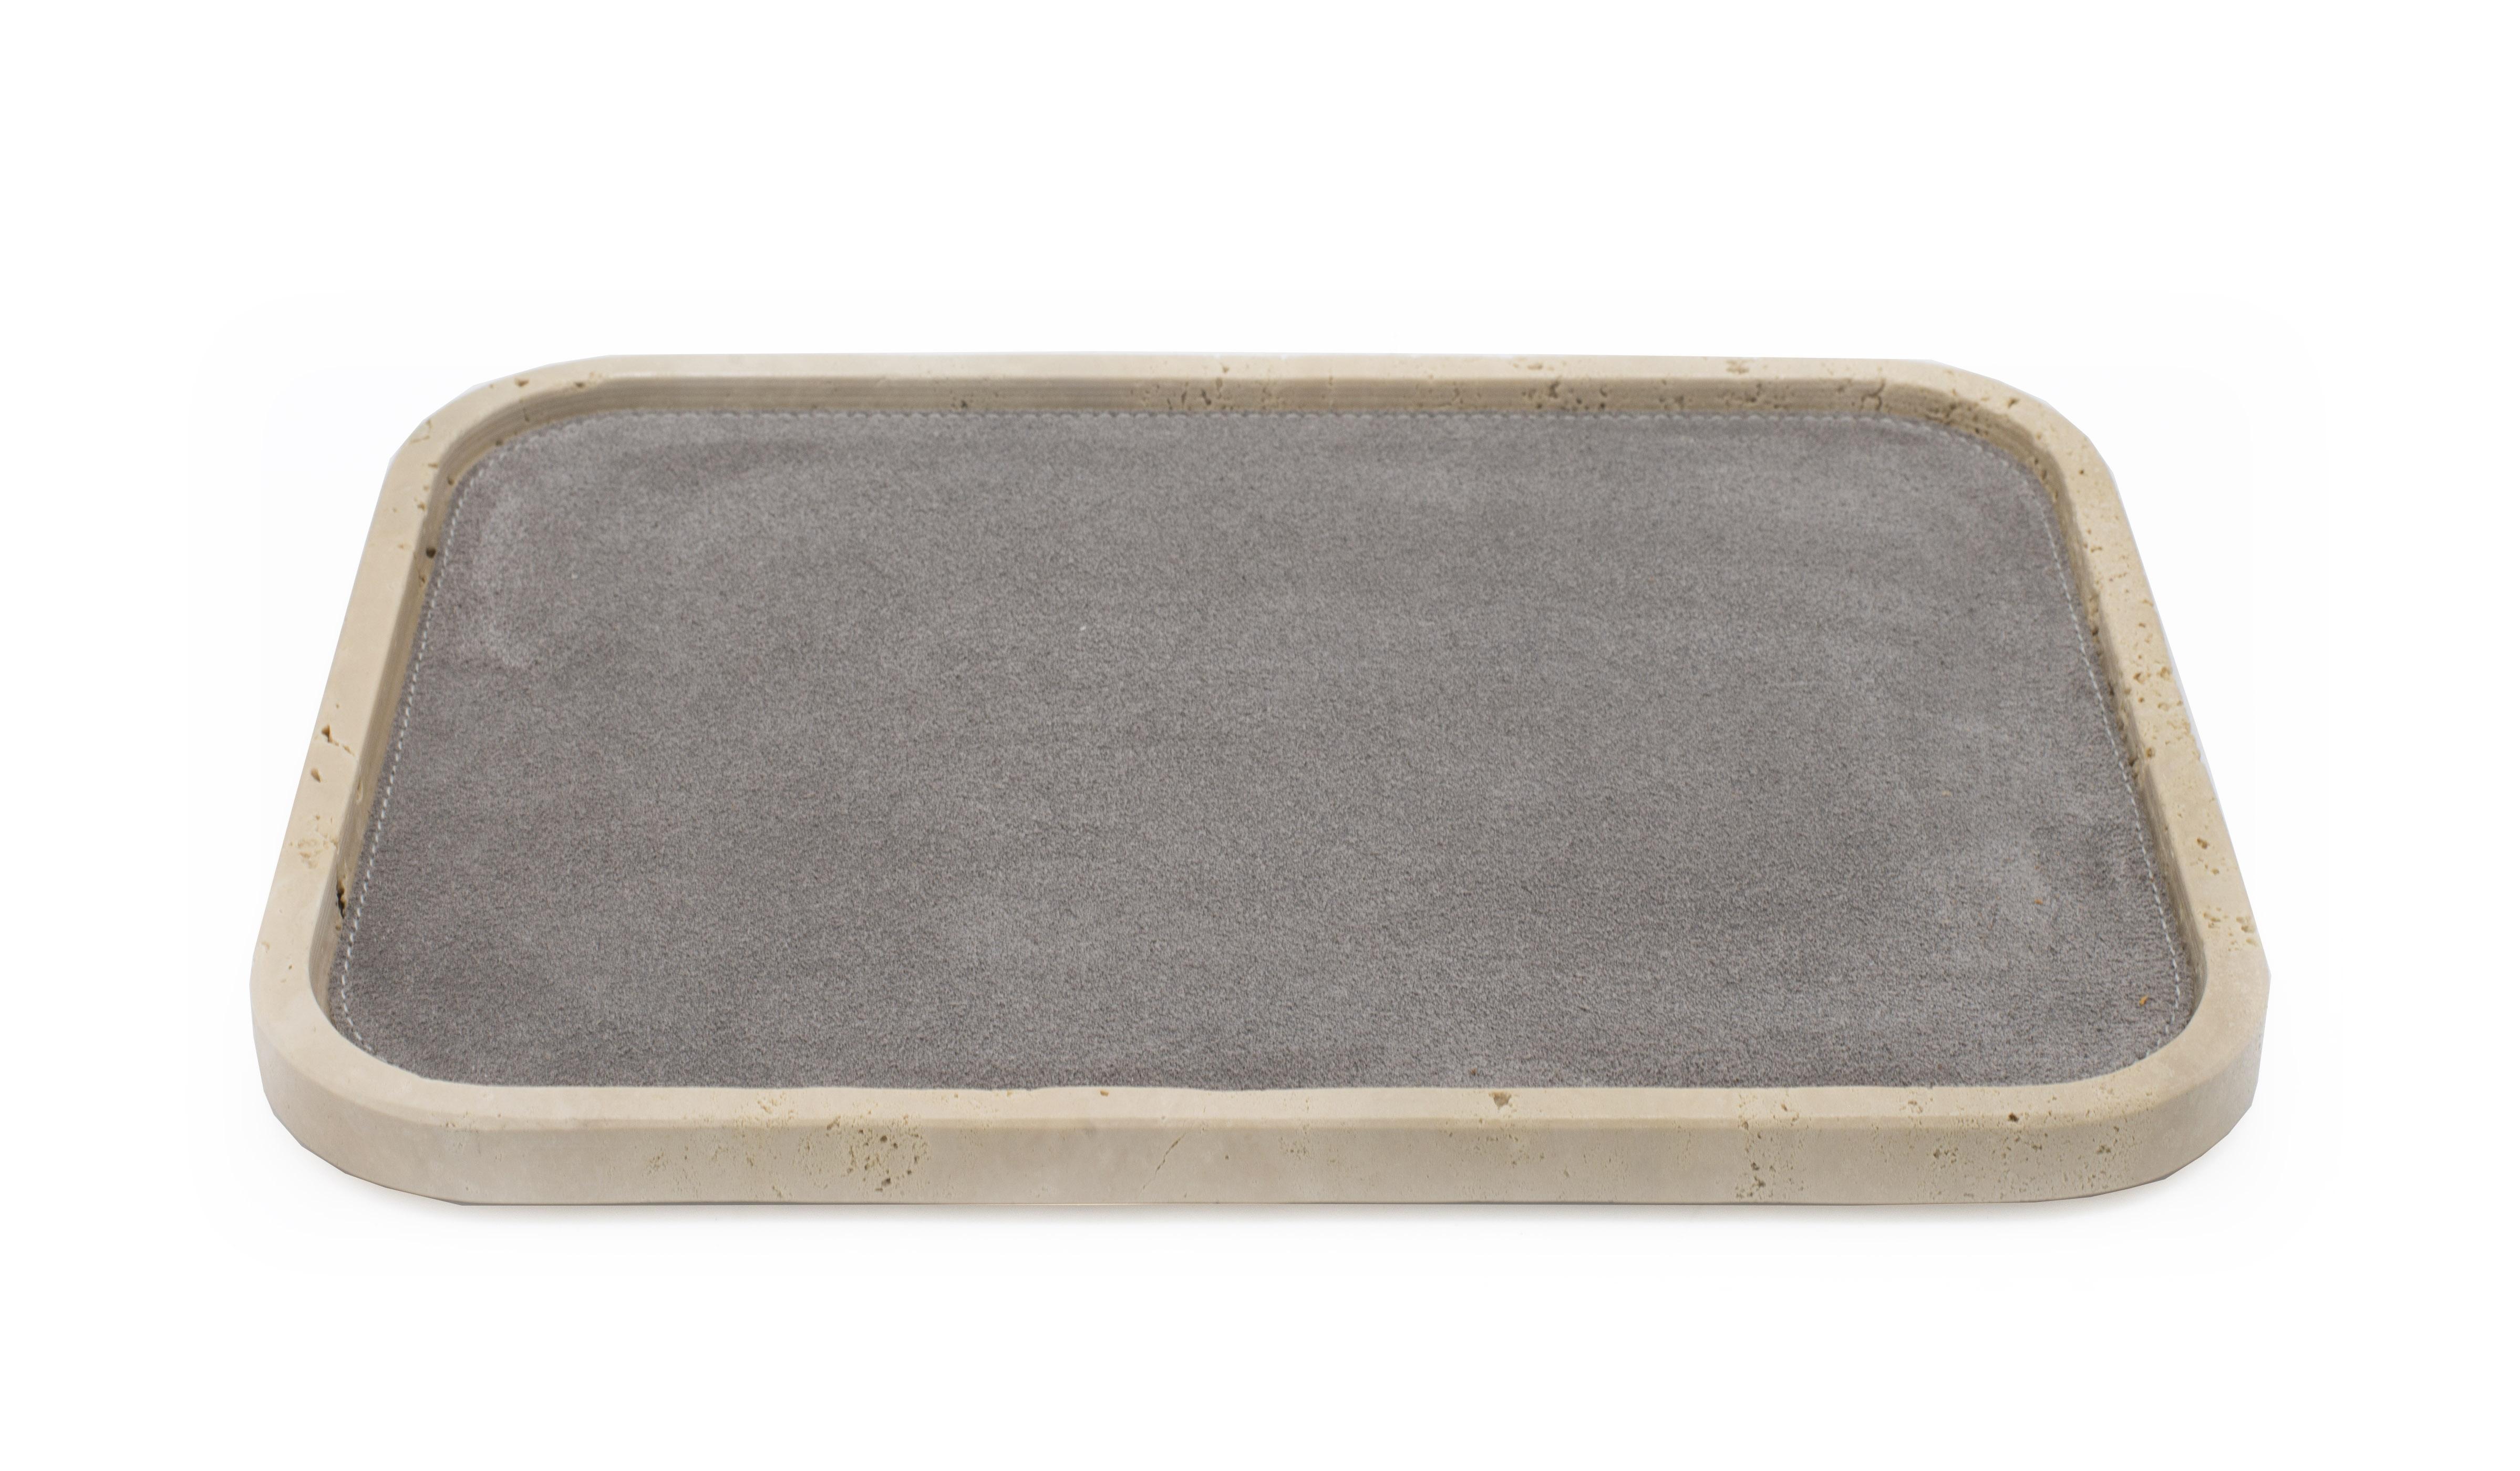 Contemporary rectangular travertine valet tray with a gray suede interior and rounded corners (Made in Italy).